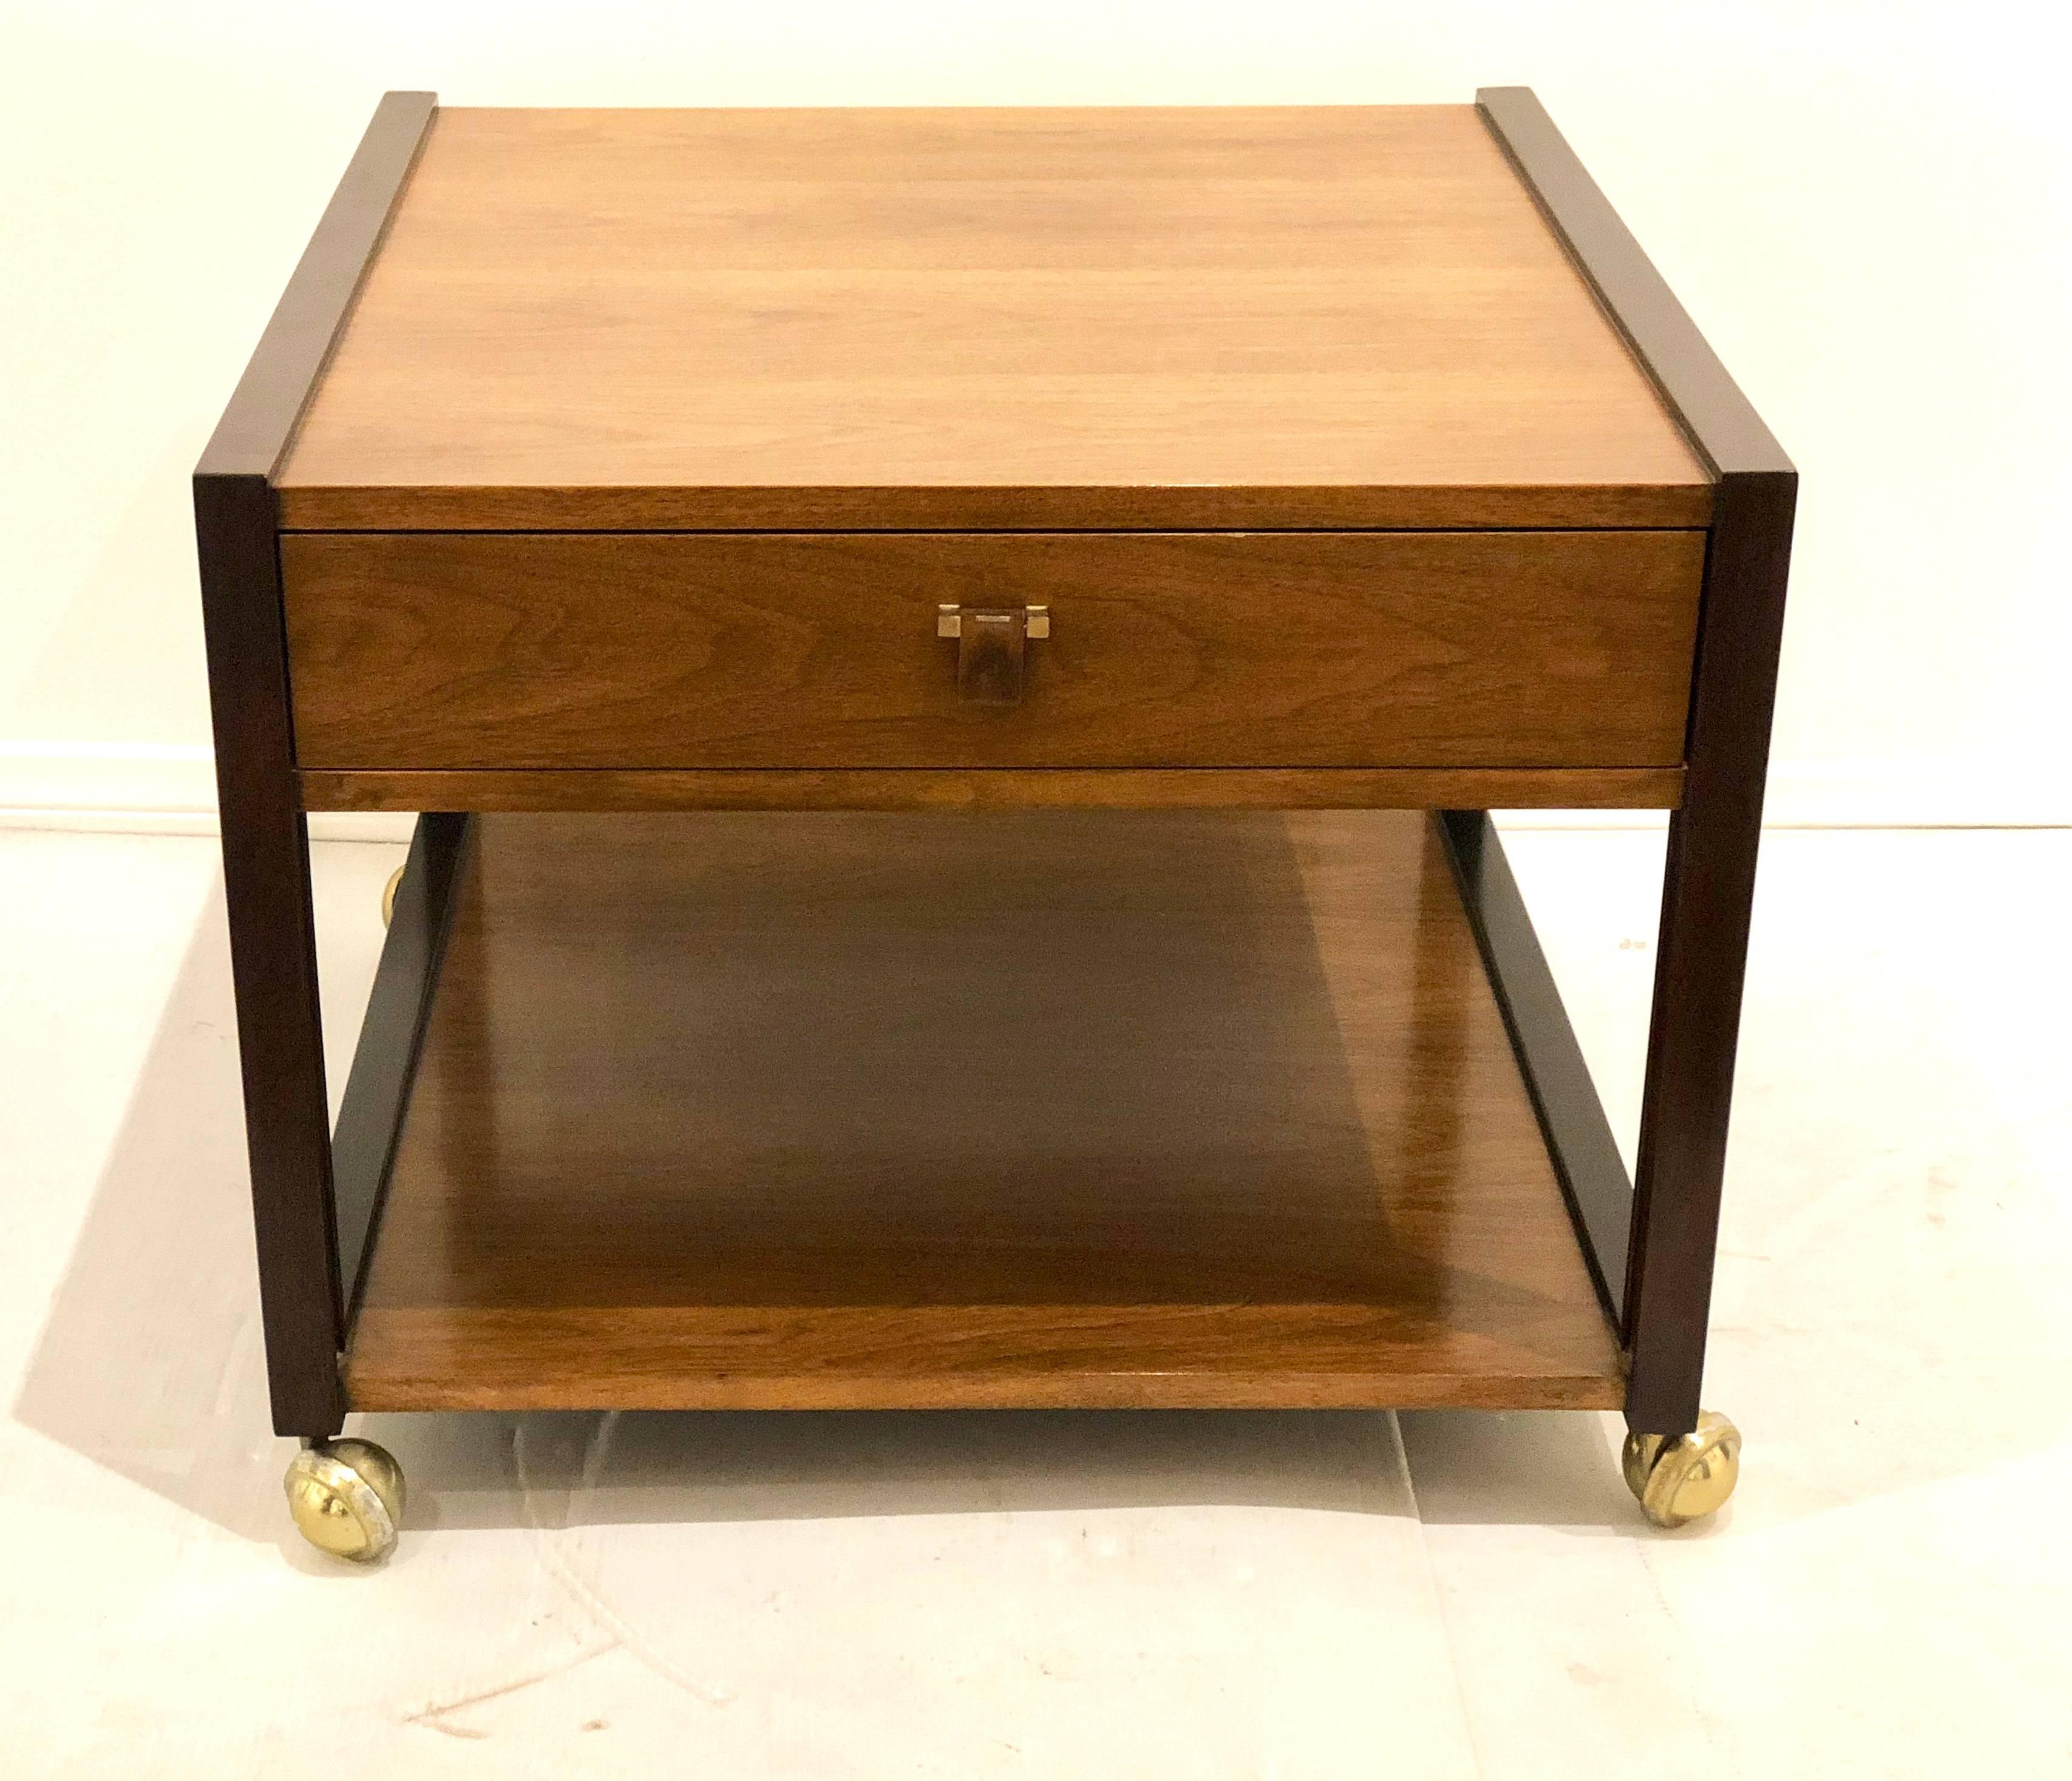 The design of this wide side table by Edward Wormley for Dunbar, in a walnut and rosewood combo, drawer with a rosewood and brass pull, a deep shelf below and bold brass ball casters for easy moving. Great in between two club chairs.